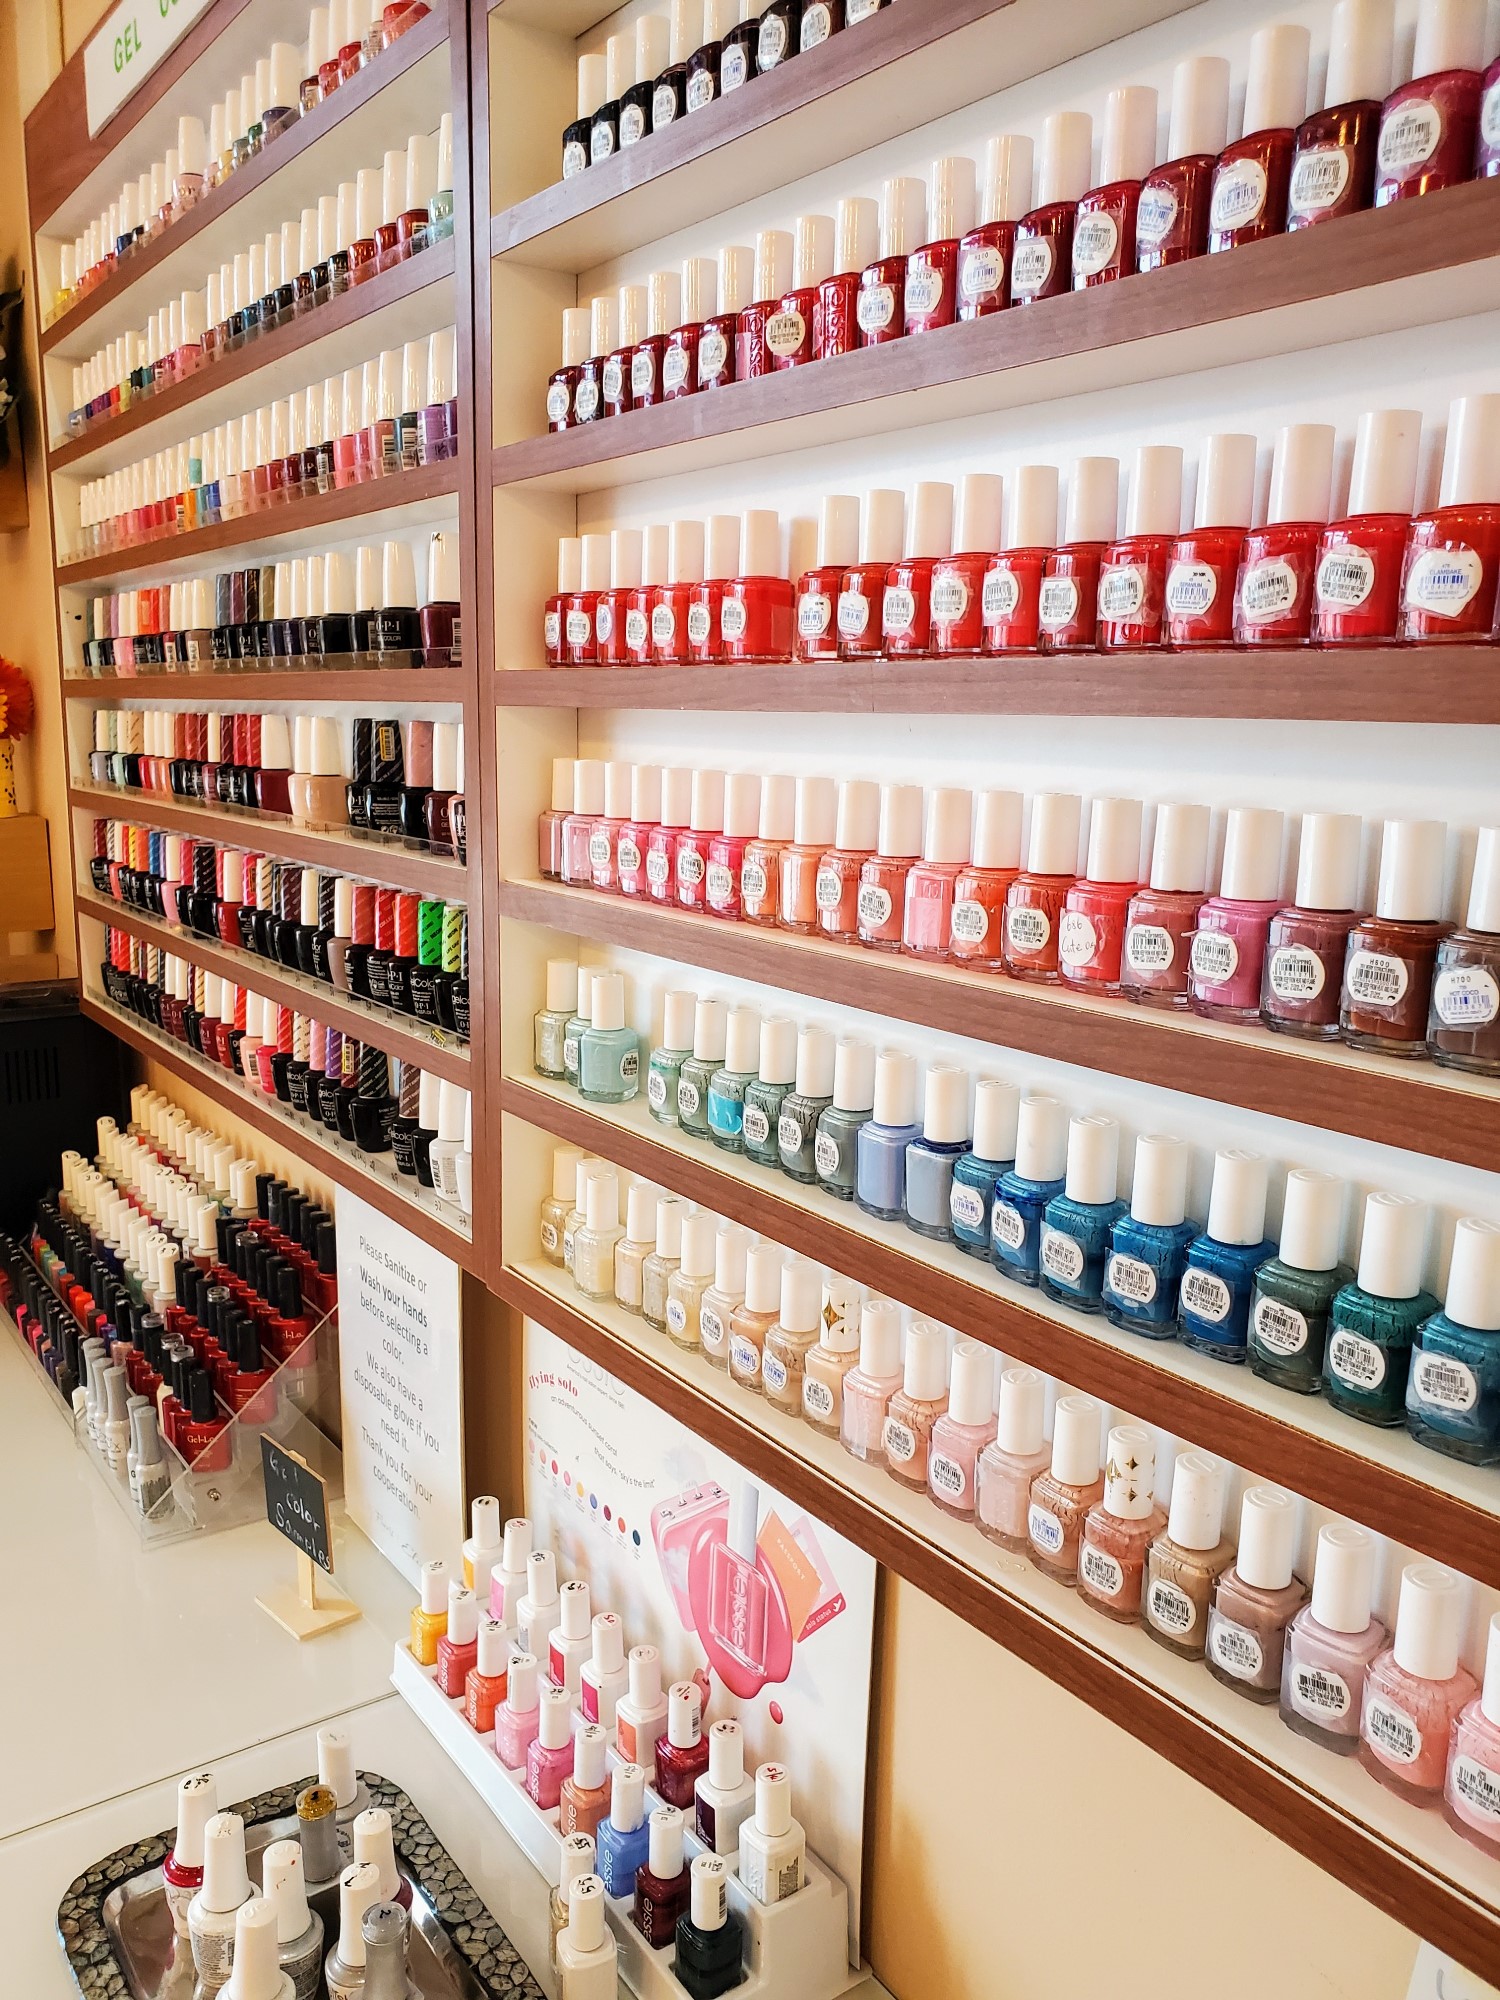 Best Nail Salons near Exton Nails in Exton, PA - Yelp